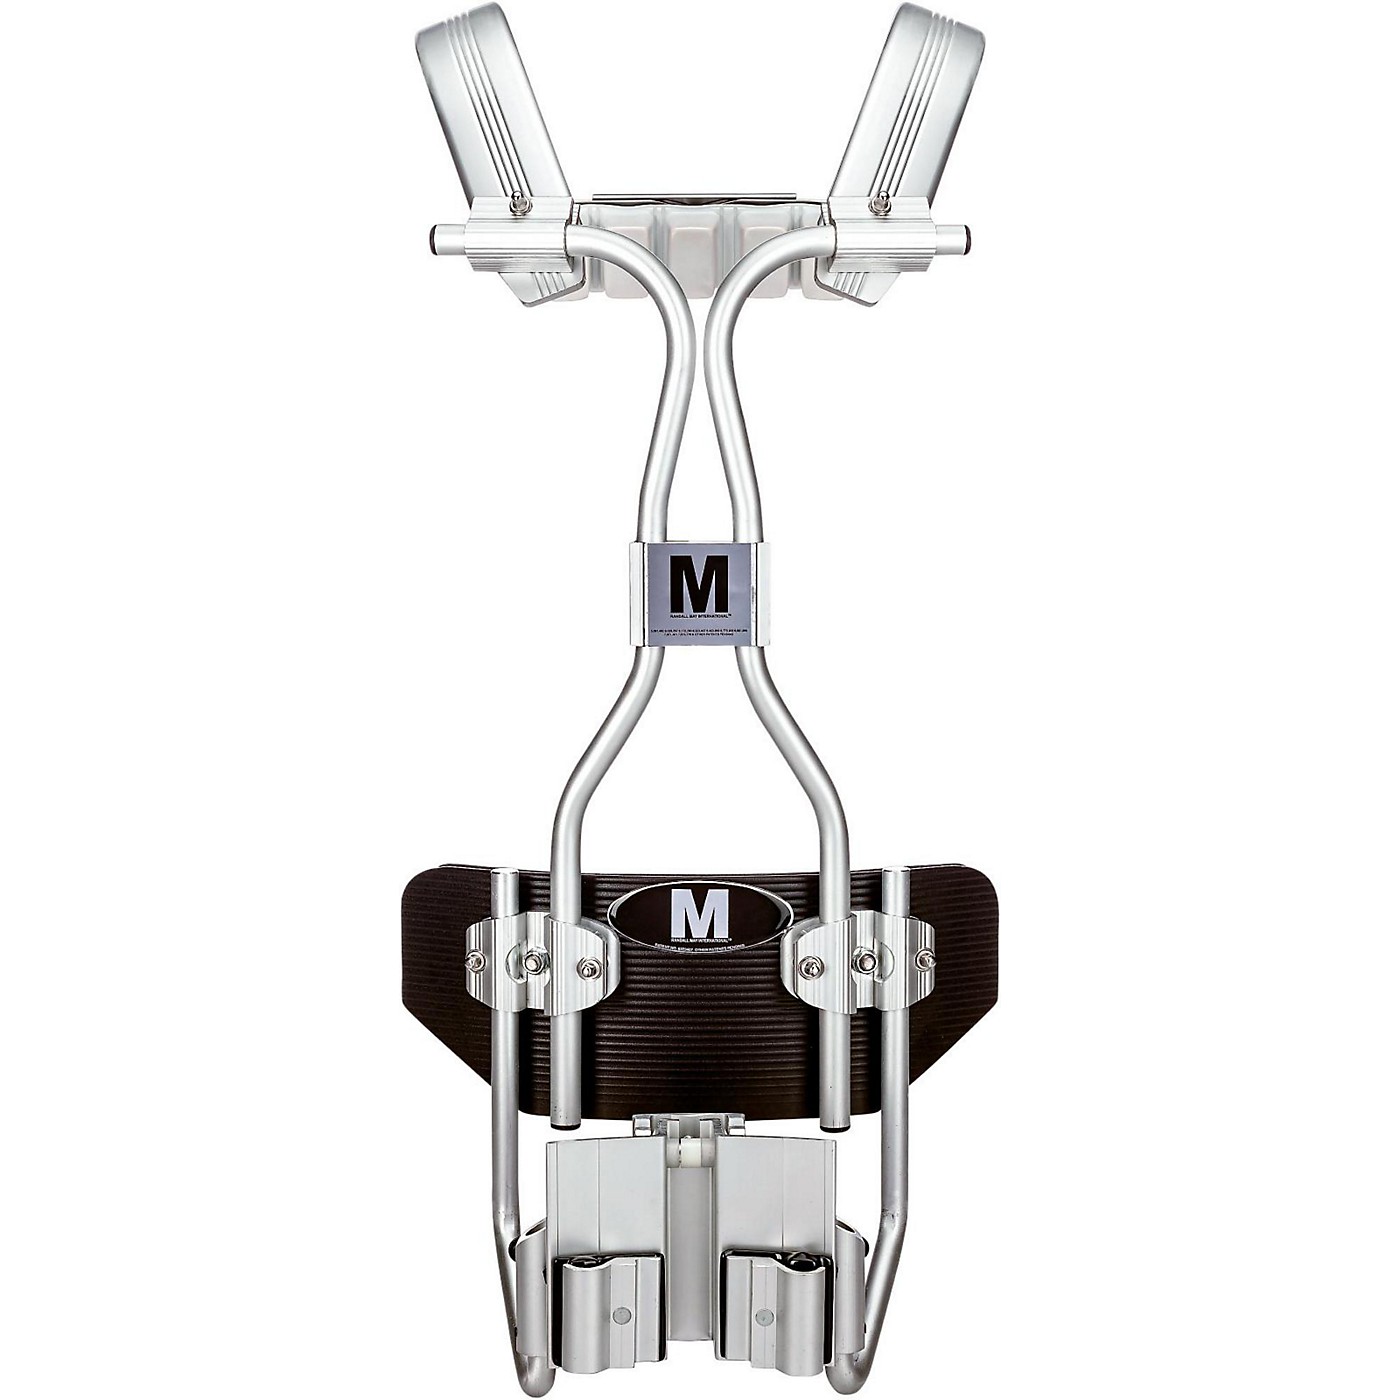 Mapex Aluminum Tubular Snare Drum Carrier by Randall May thumbnail